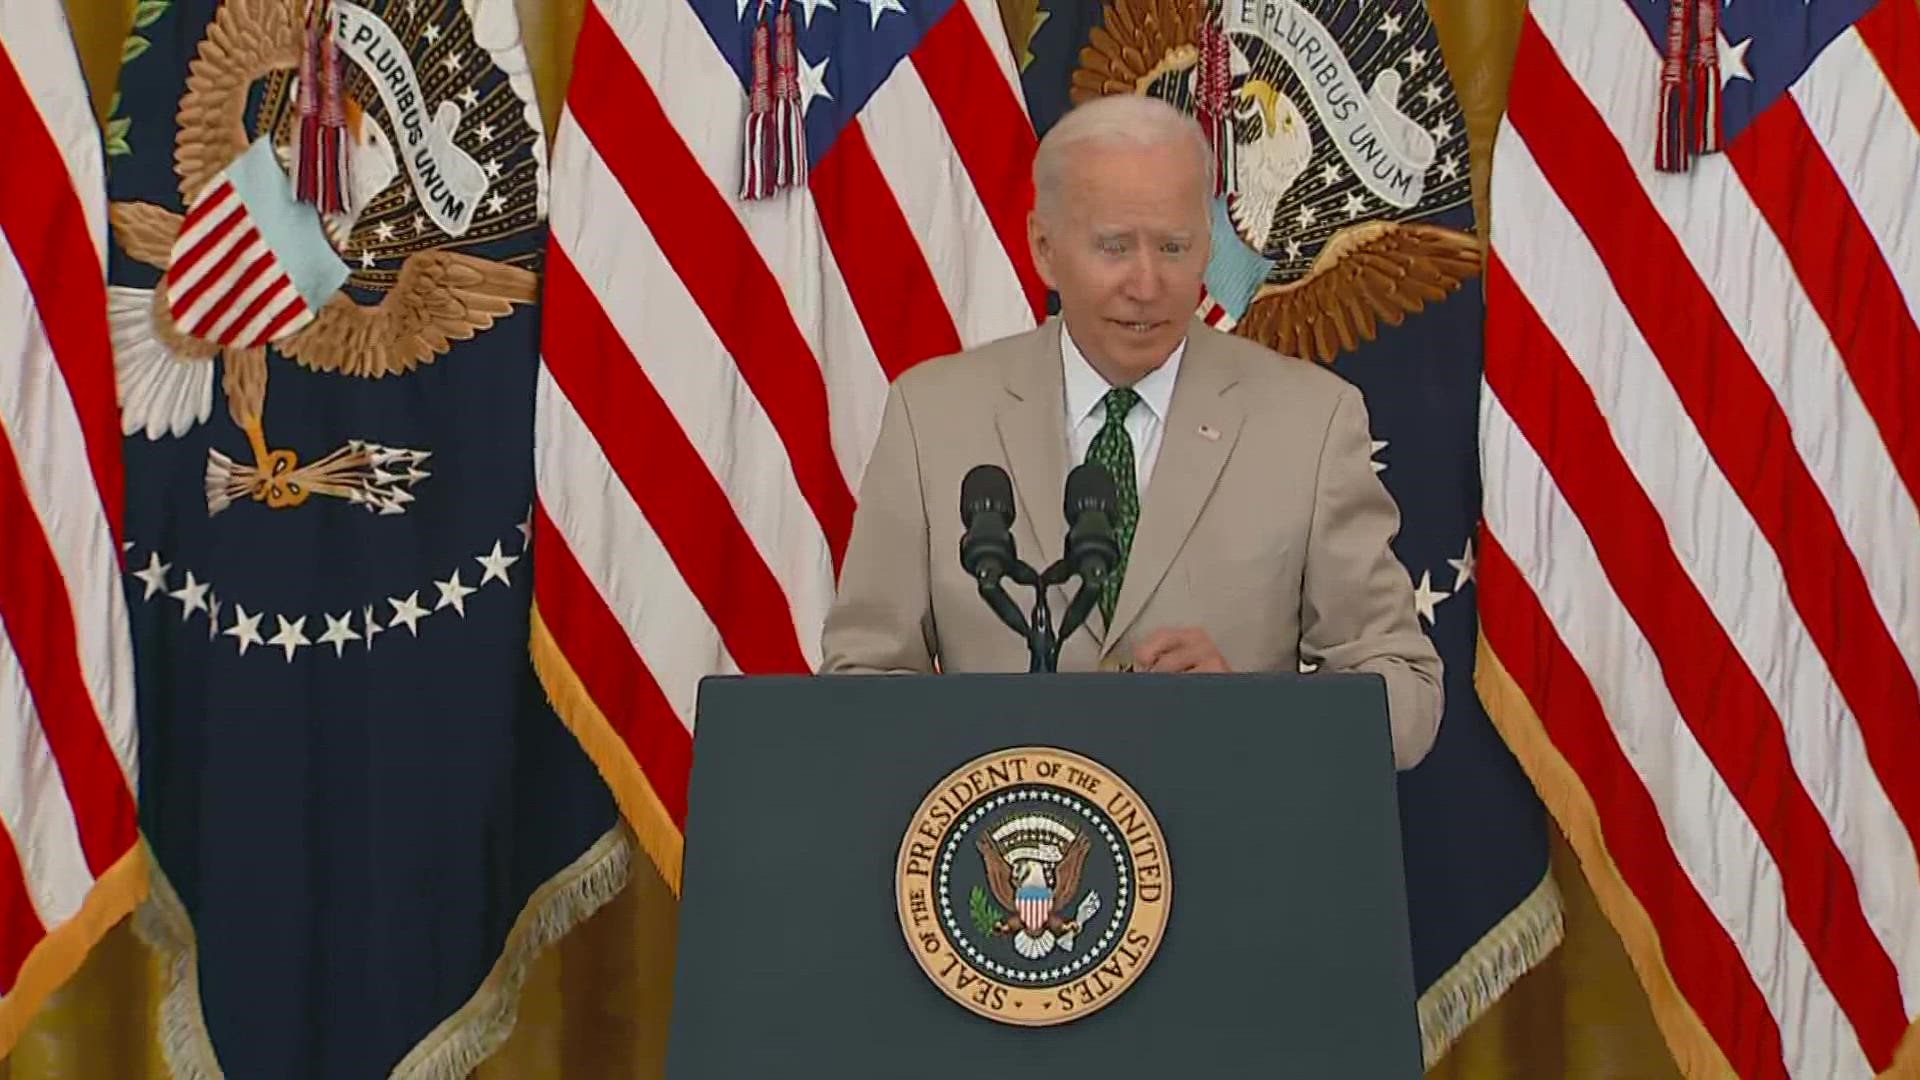 President Biden will discuss the jobs report which showed hiring surged in July as American employers added 943,000 jobs.